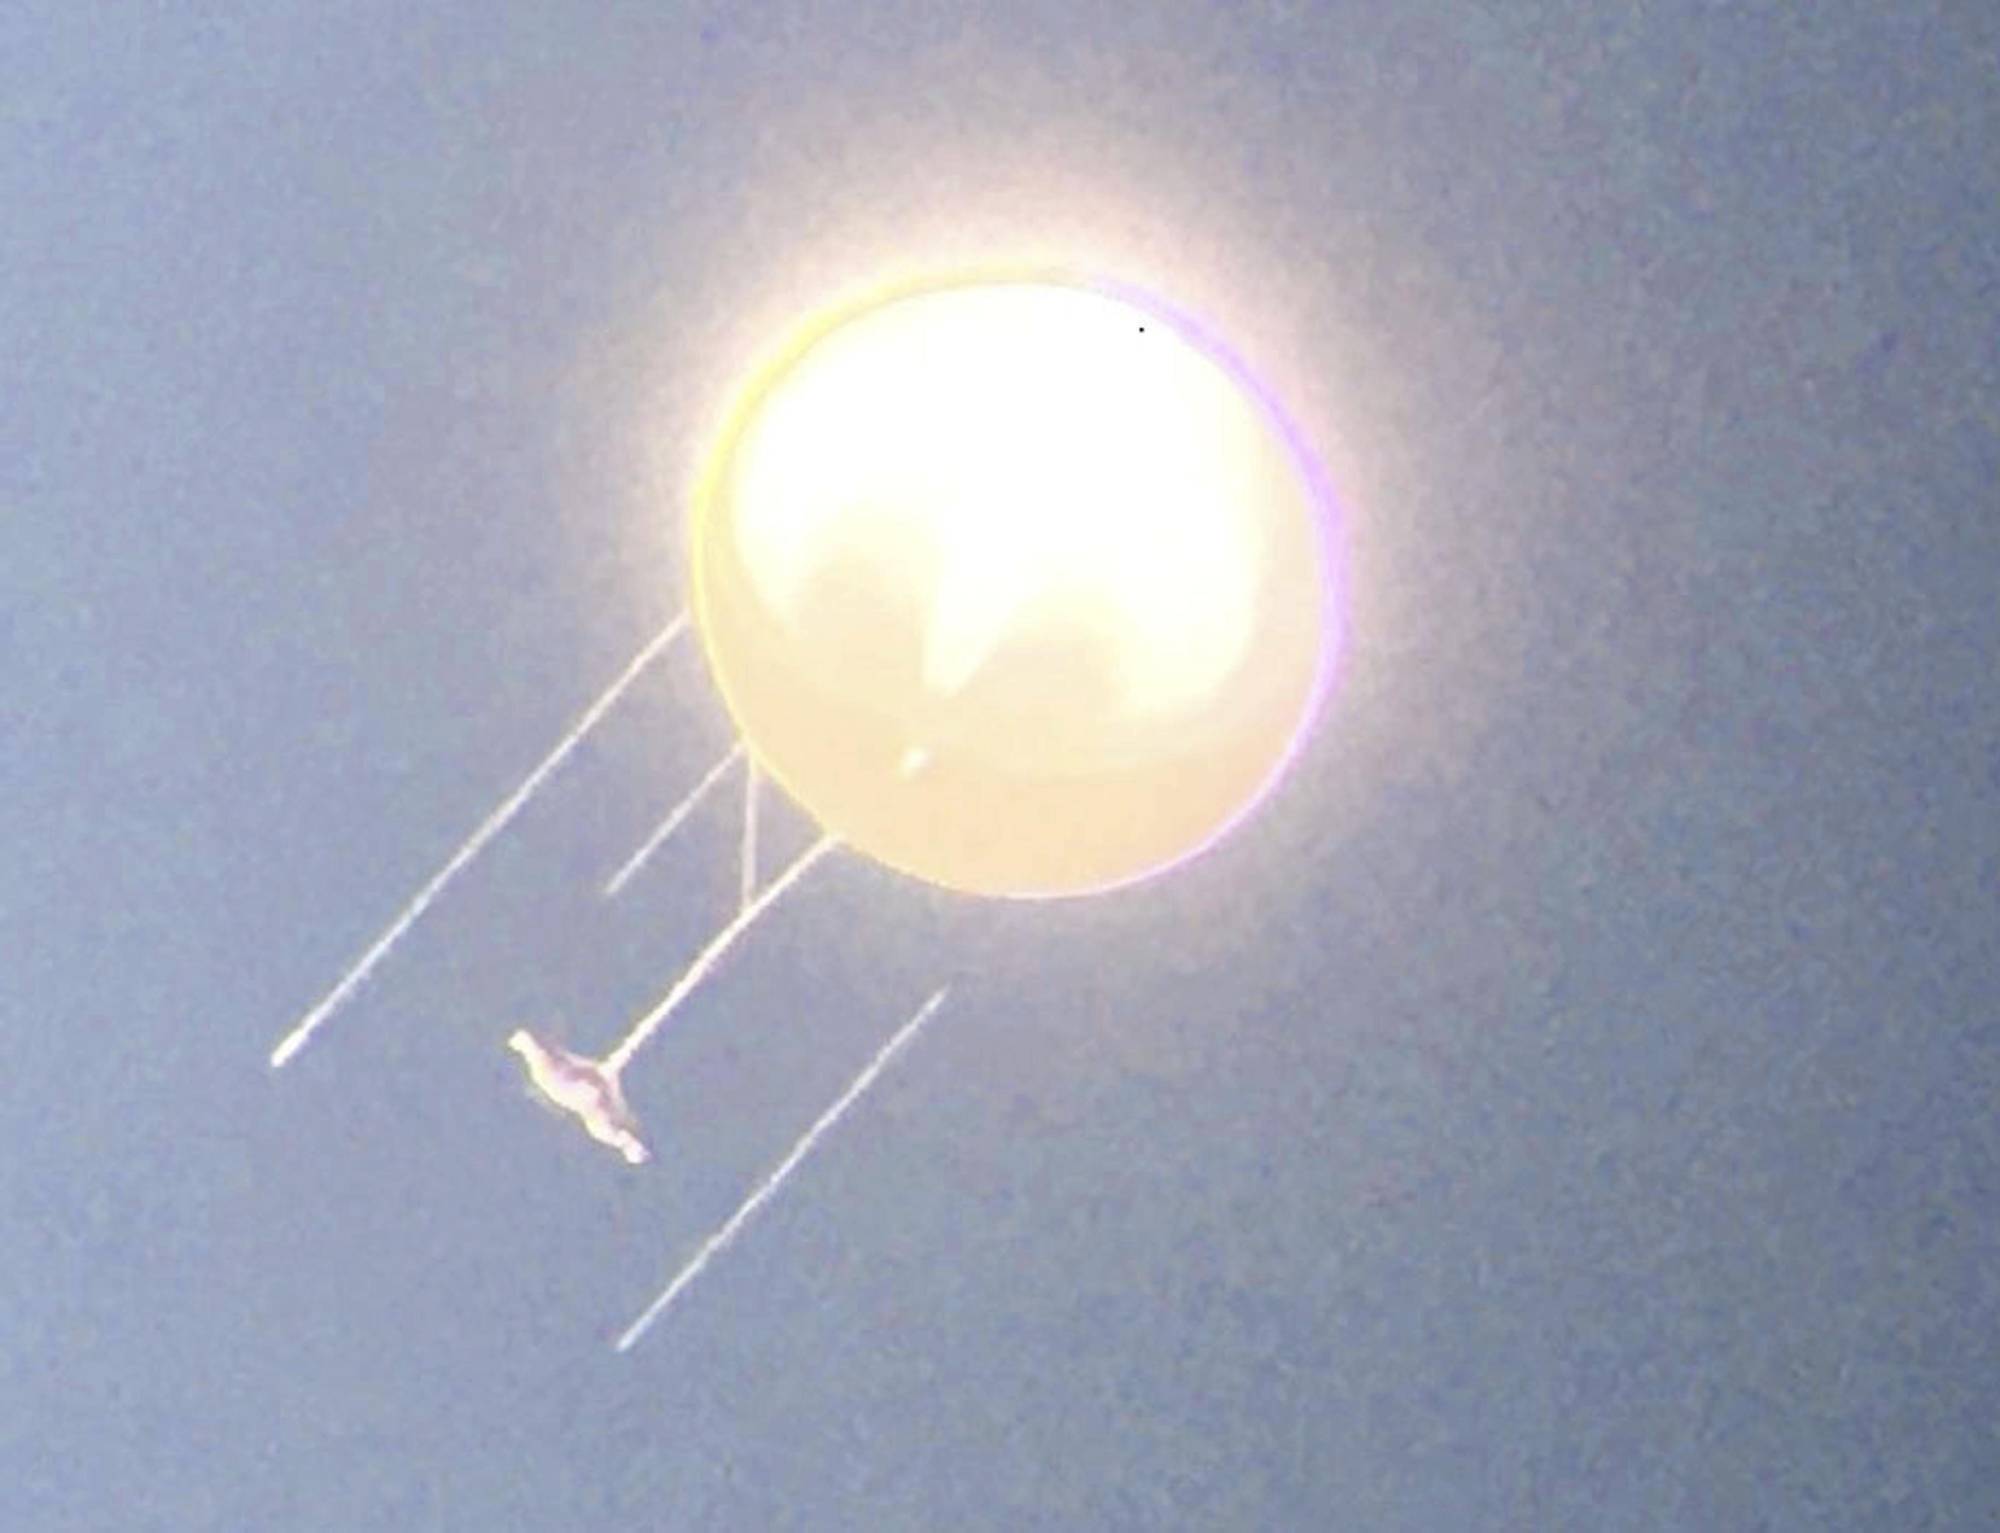 A flying object resembling a suspected Chinese spy balloon that flew over the U.S. this month is seen in a photograph taken by a Sendai Space Museum employee through a telescope in Satsumasendai, Kagoshima Prefecture, on Nov. 20, 2019. | COURTESY OF SENDAI SPACE MUSEUM / VIA KYODO